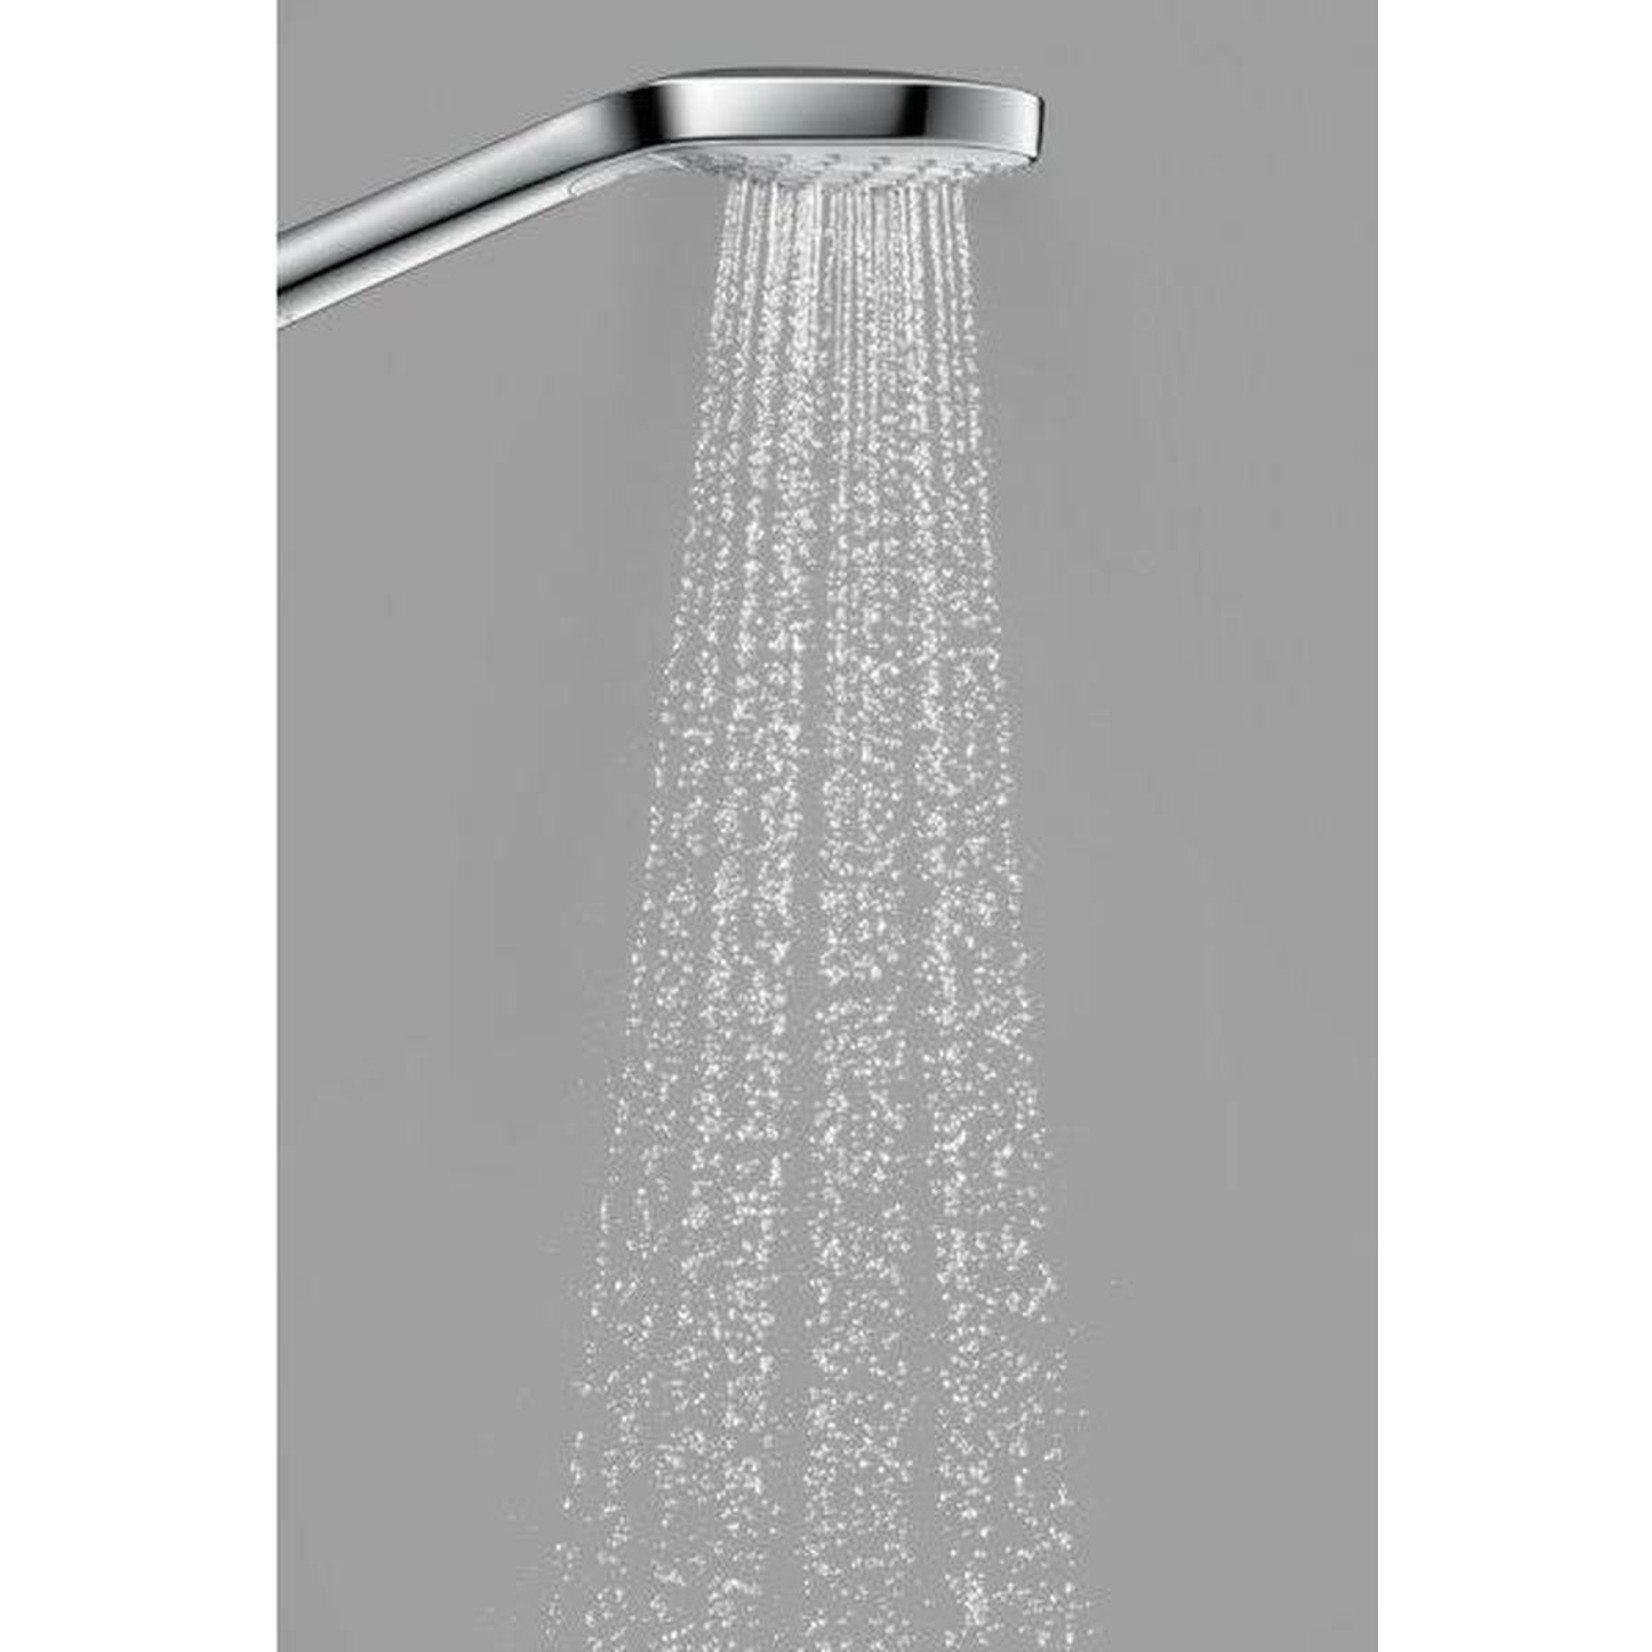 Hansgrohe hansgrohe Croma Select S Vario Handdouche - Wit / Chroom